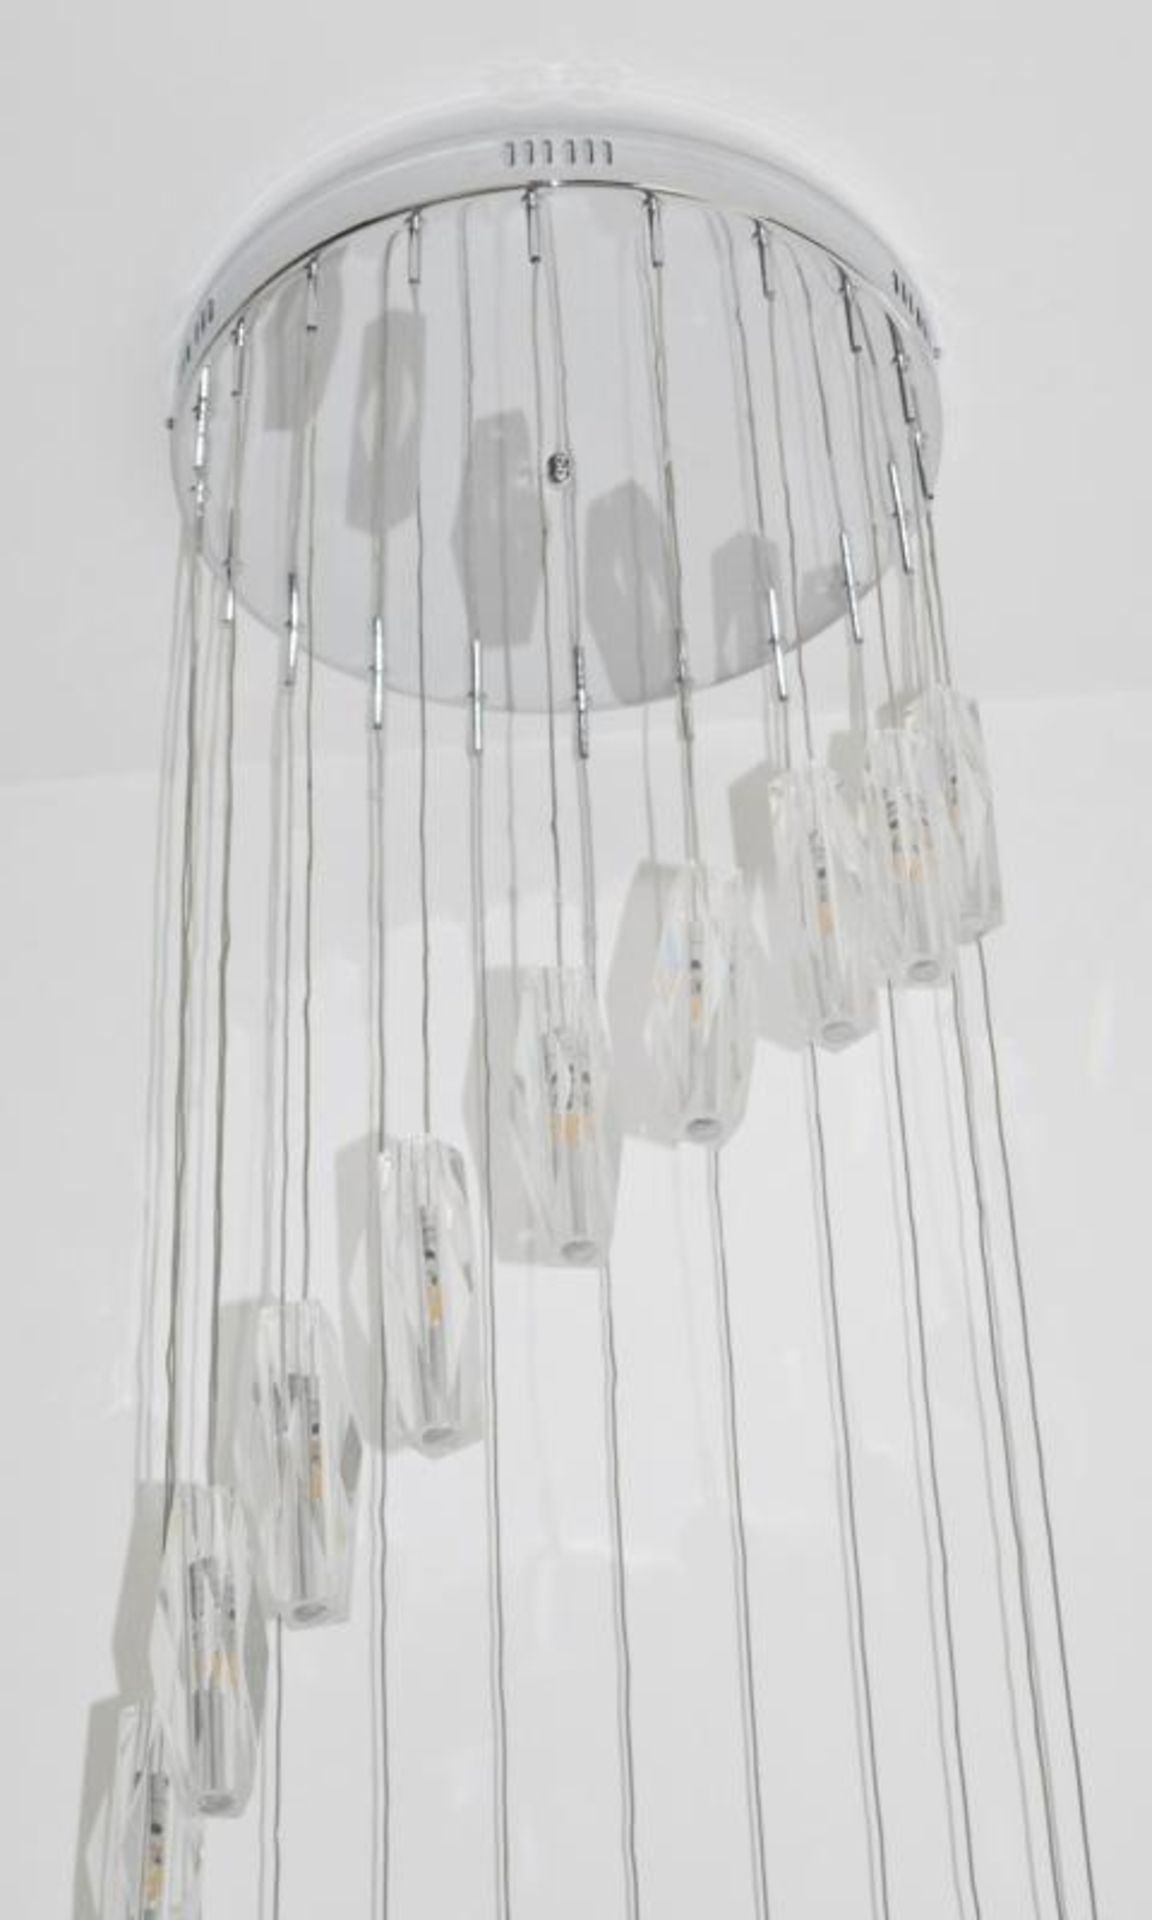 1 x Sculptured Ice Chrome 20 Light Dingle Dangle Pendant With Crystal Glass - Ex Display Stock - CL2 - Image 2 of 6